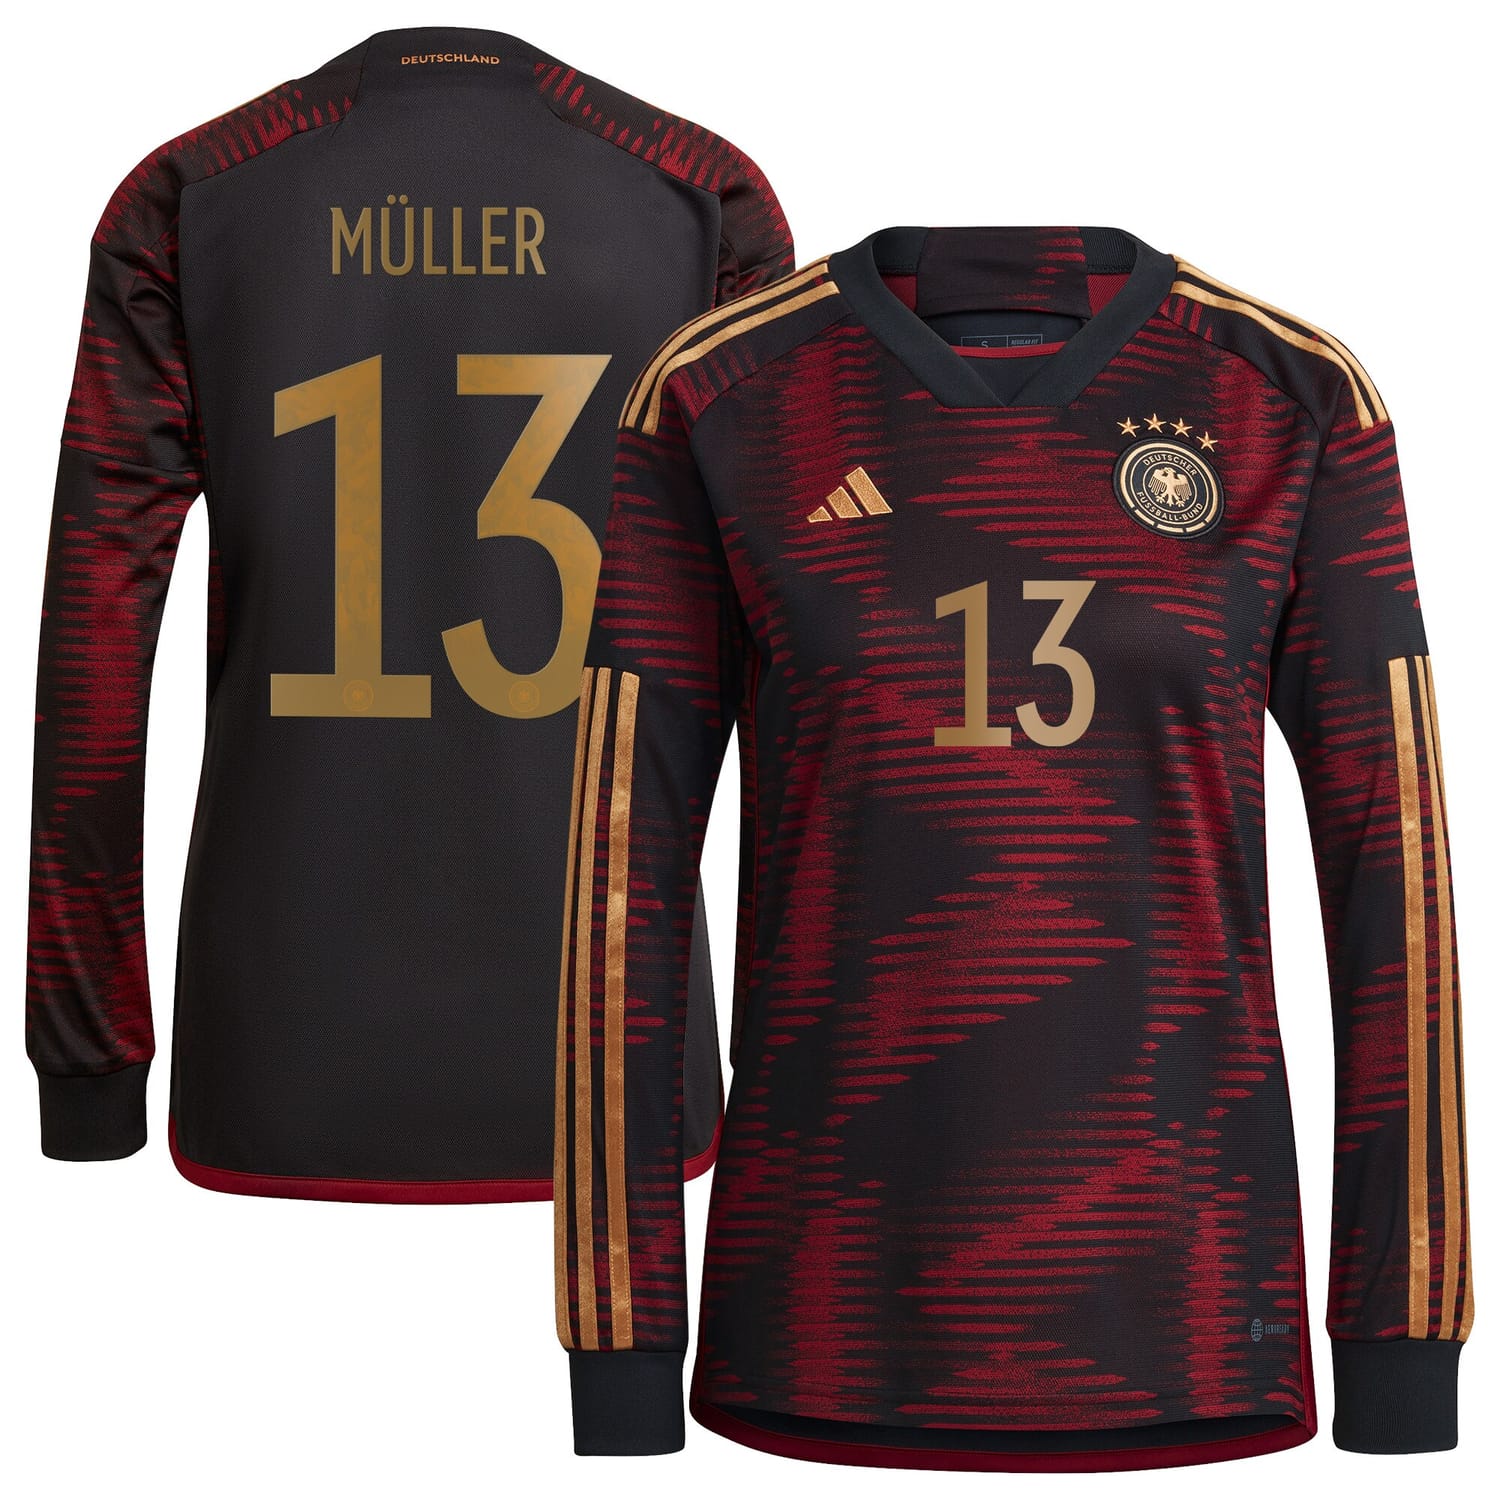 Germany National Team Away Jersey Shirt Long Sleeve player Thomas Müller 13 printing for Women